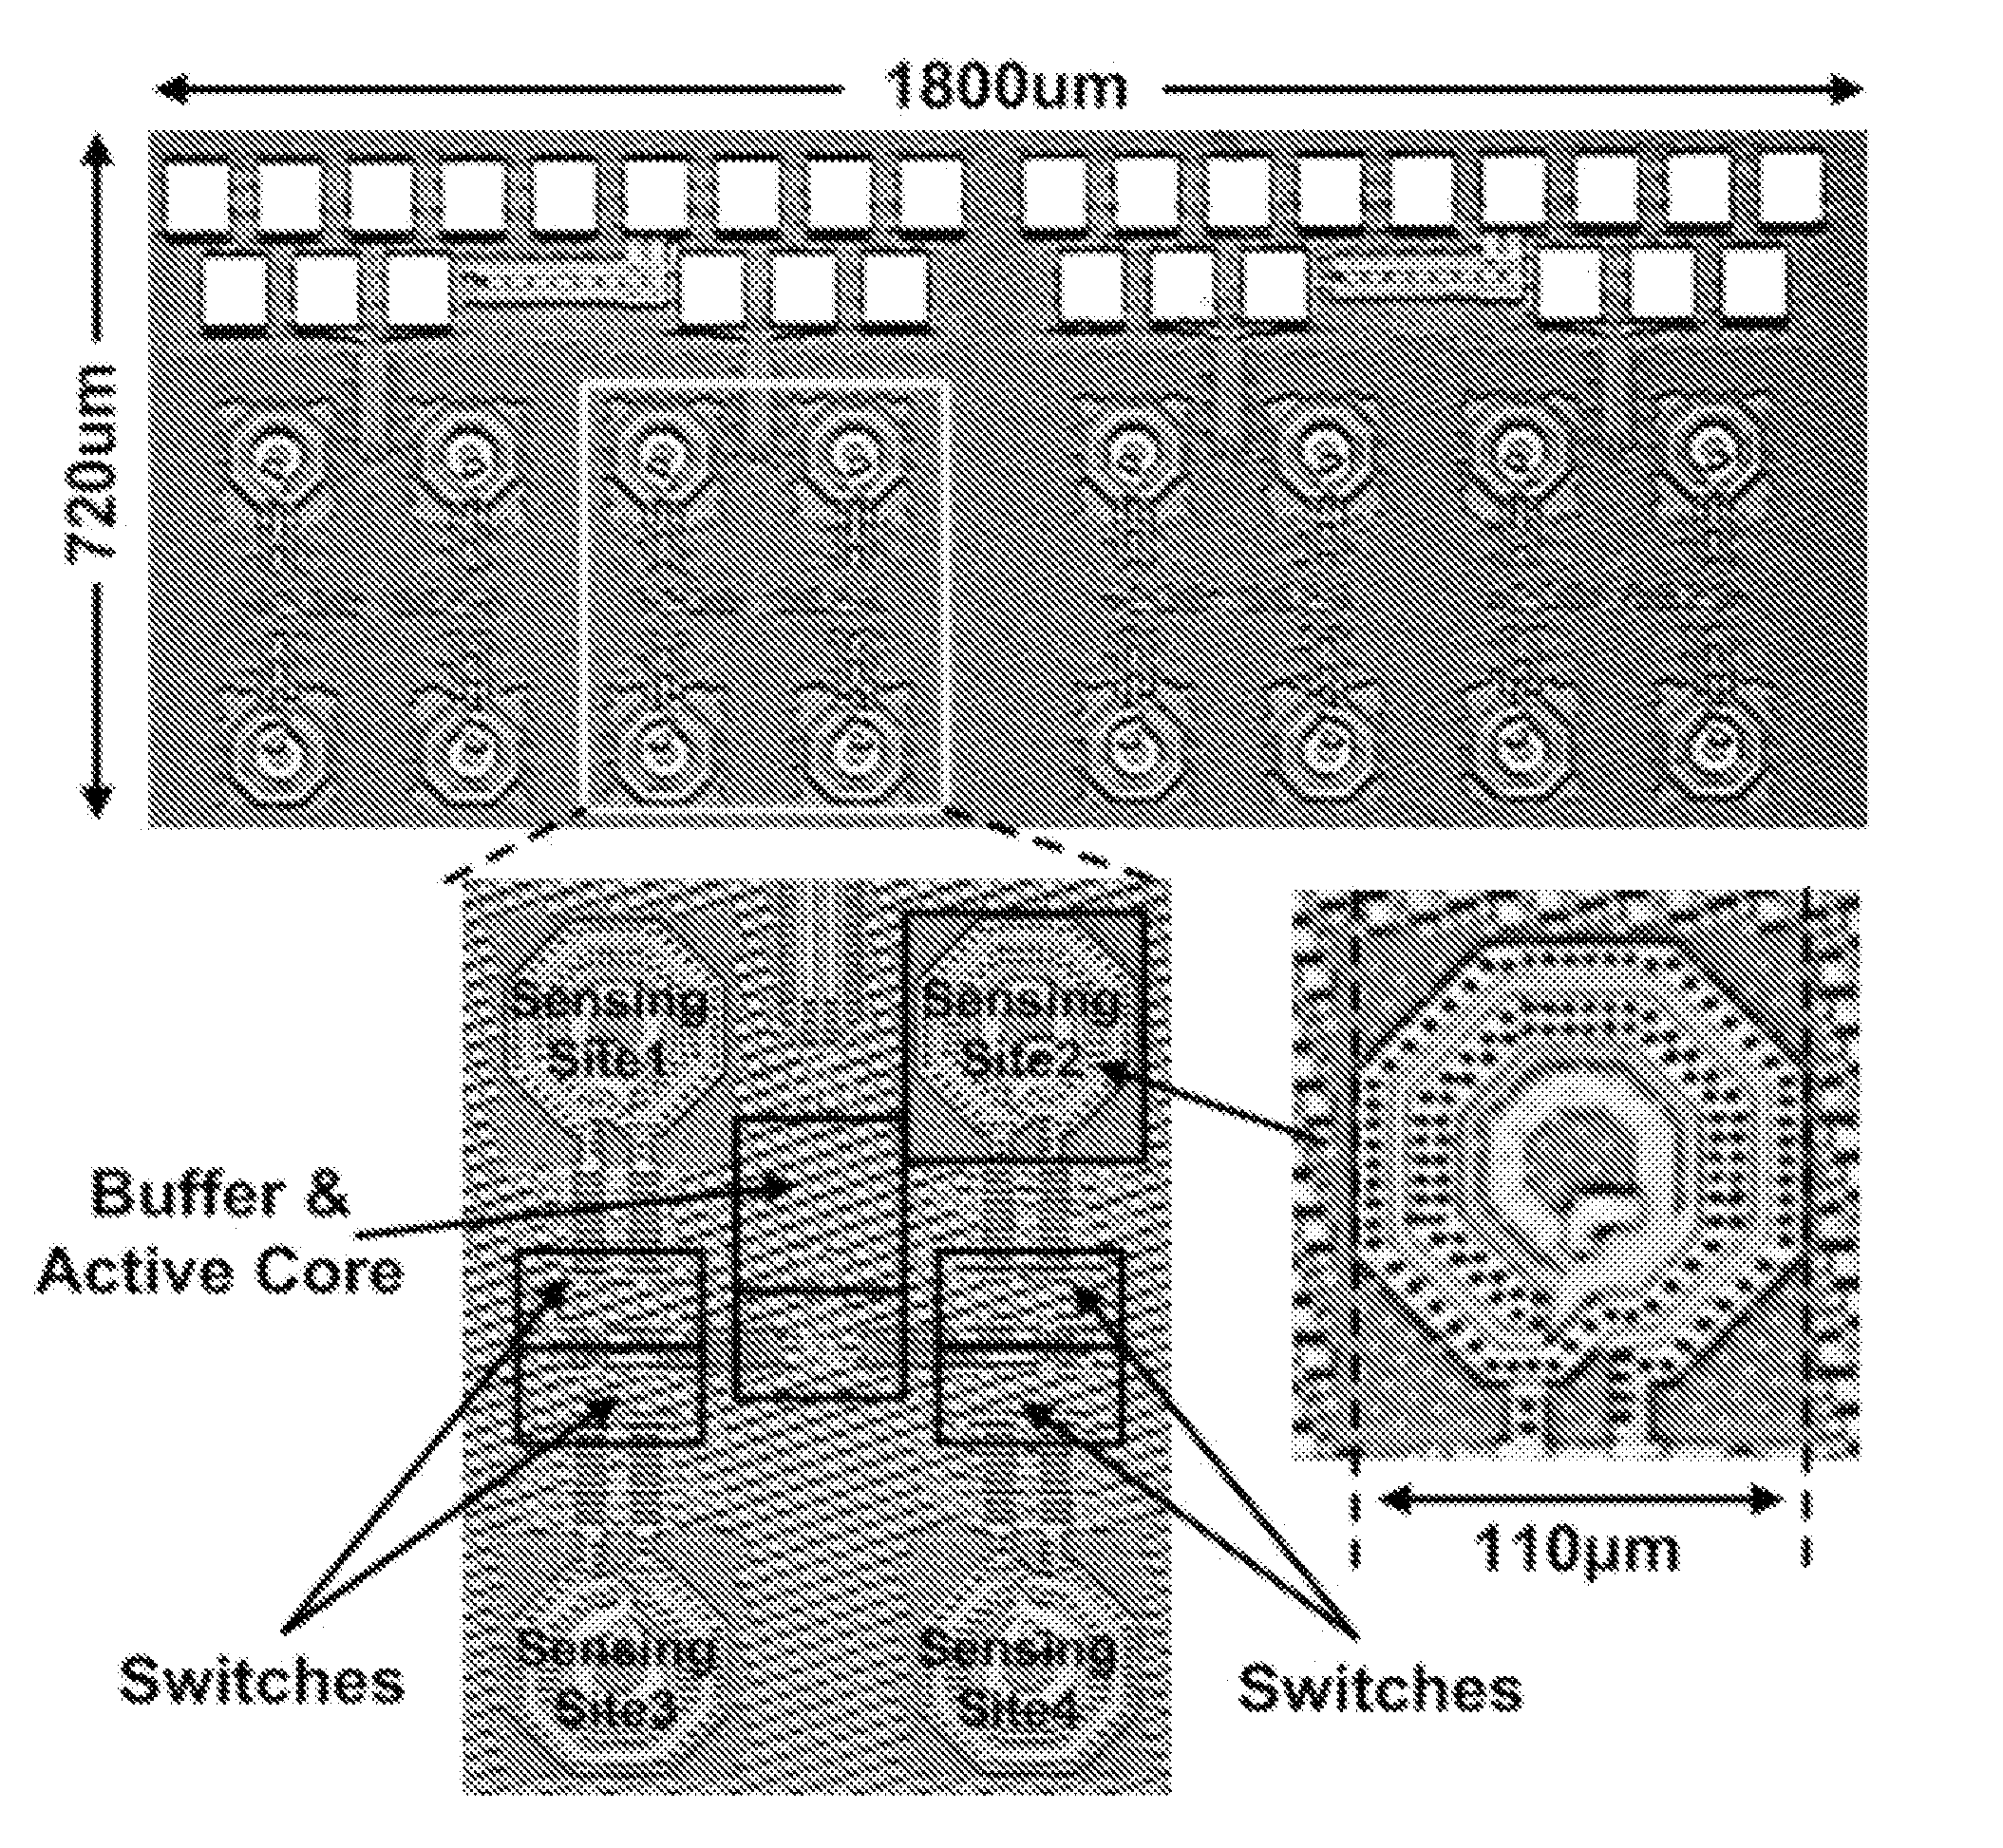 Inductors with uniform magnetic field strength in the near-field